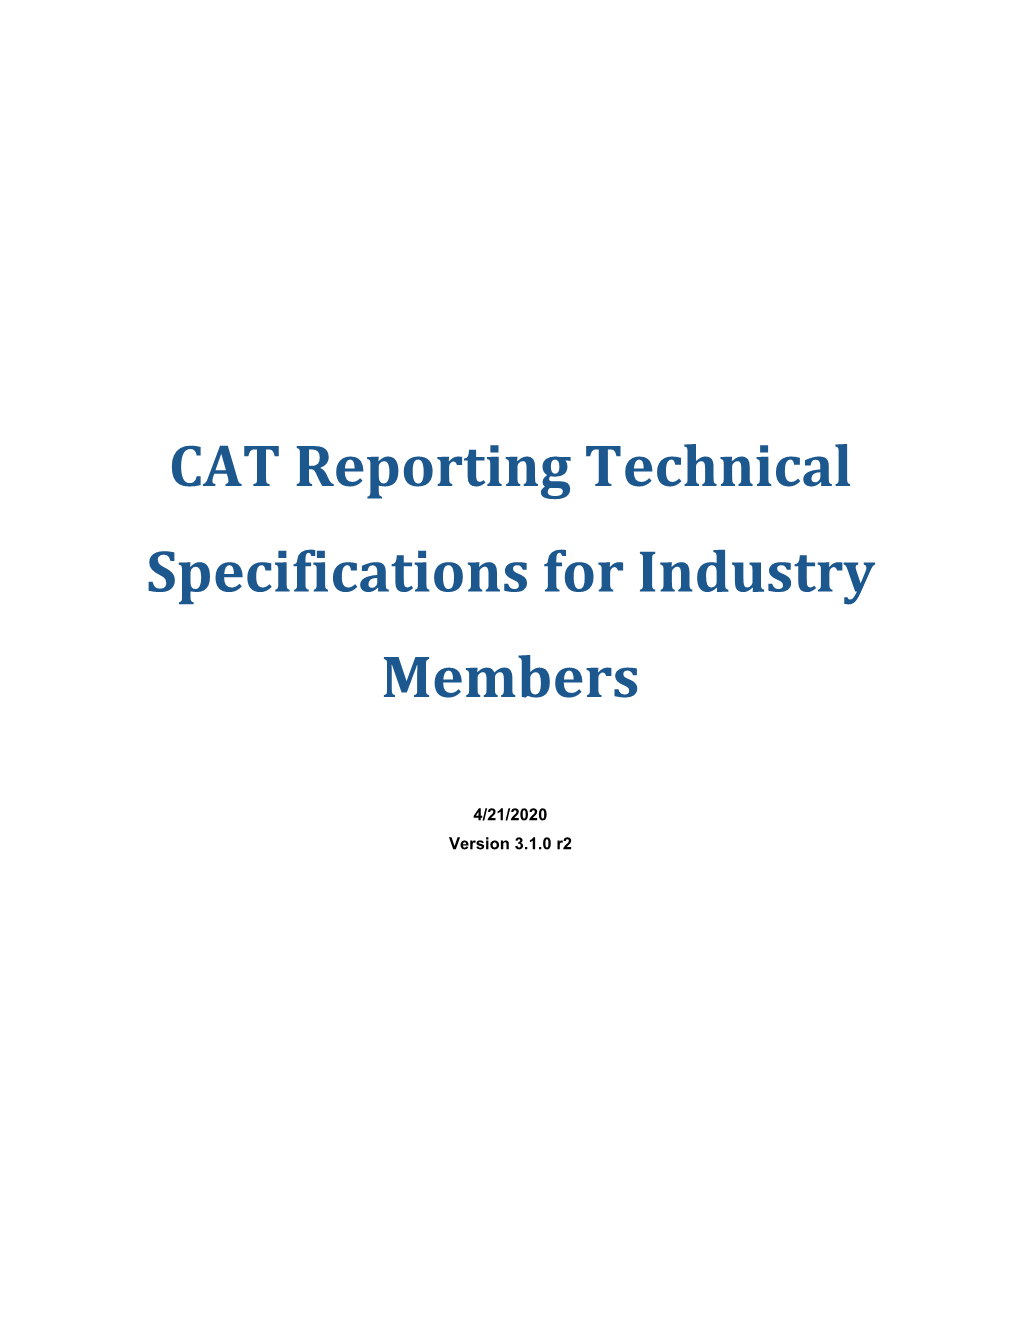 CAT Reporting Technical Specifications for Industry Members